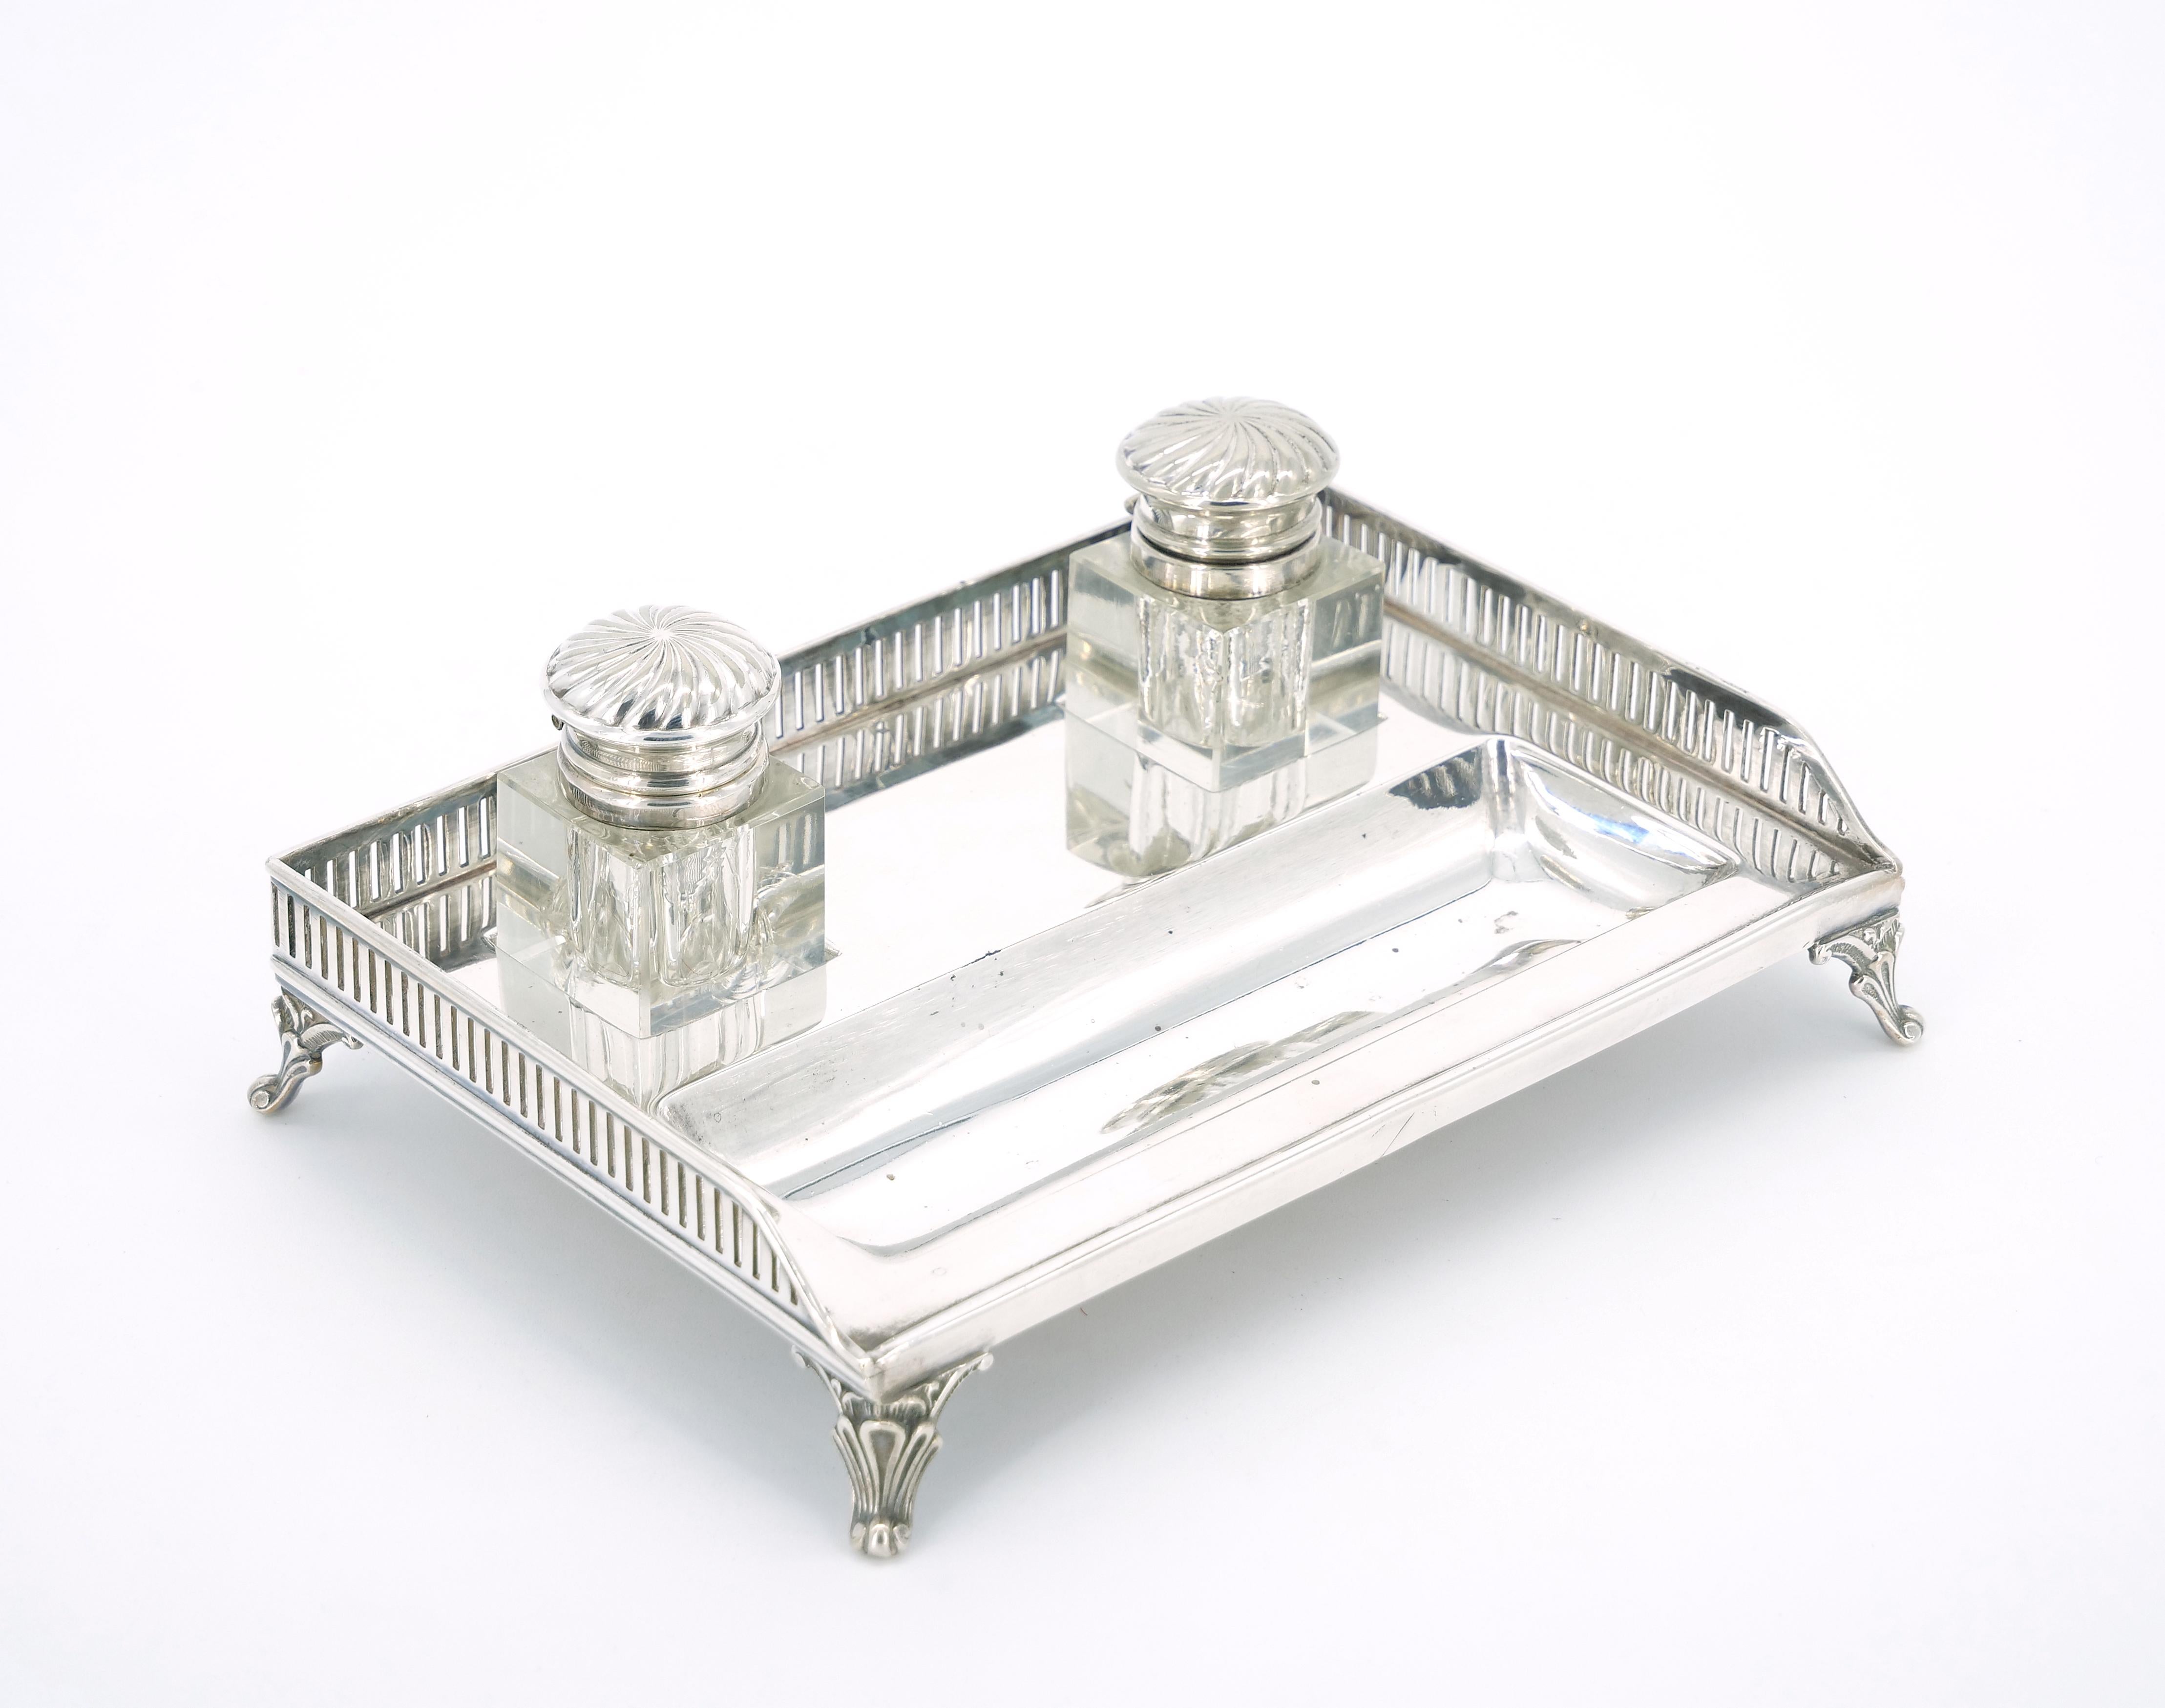 Introduce a touch of refinement to your desk or workspace with this English Silver Plated Gallery Top Rectangle Footed Holding Base, featuring an exquisite cut glass inkwell. The silver plate holding base boasts a gallery top tray, creating a